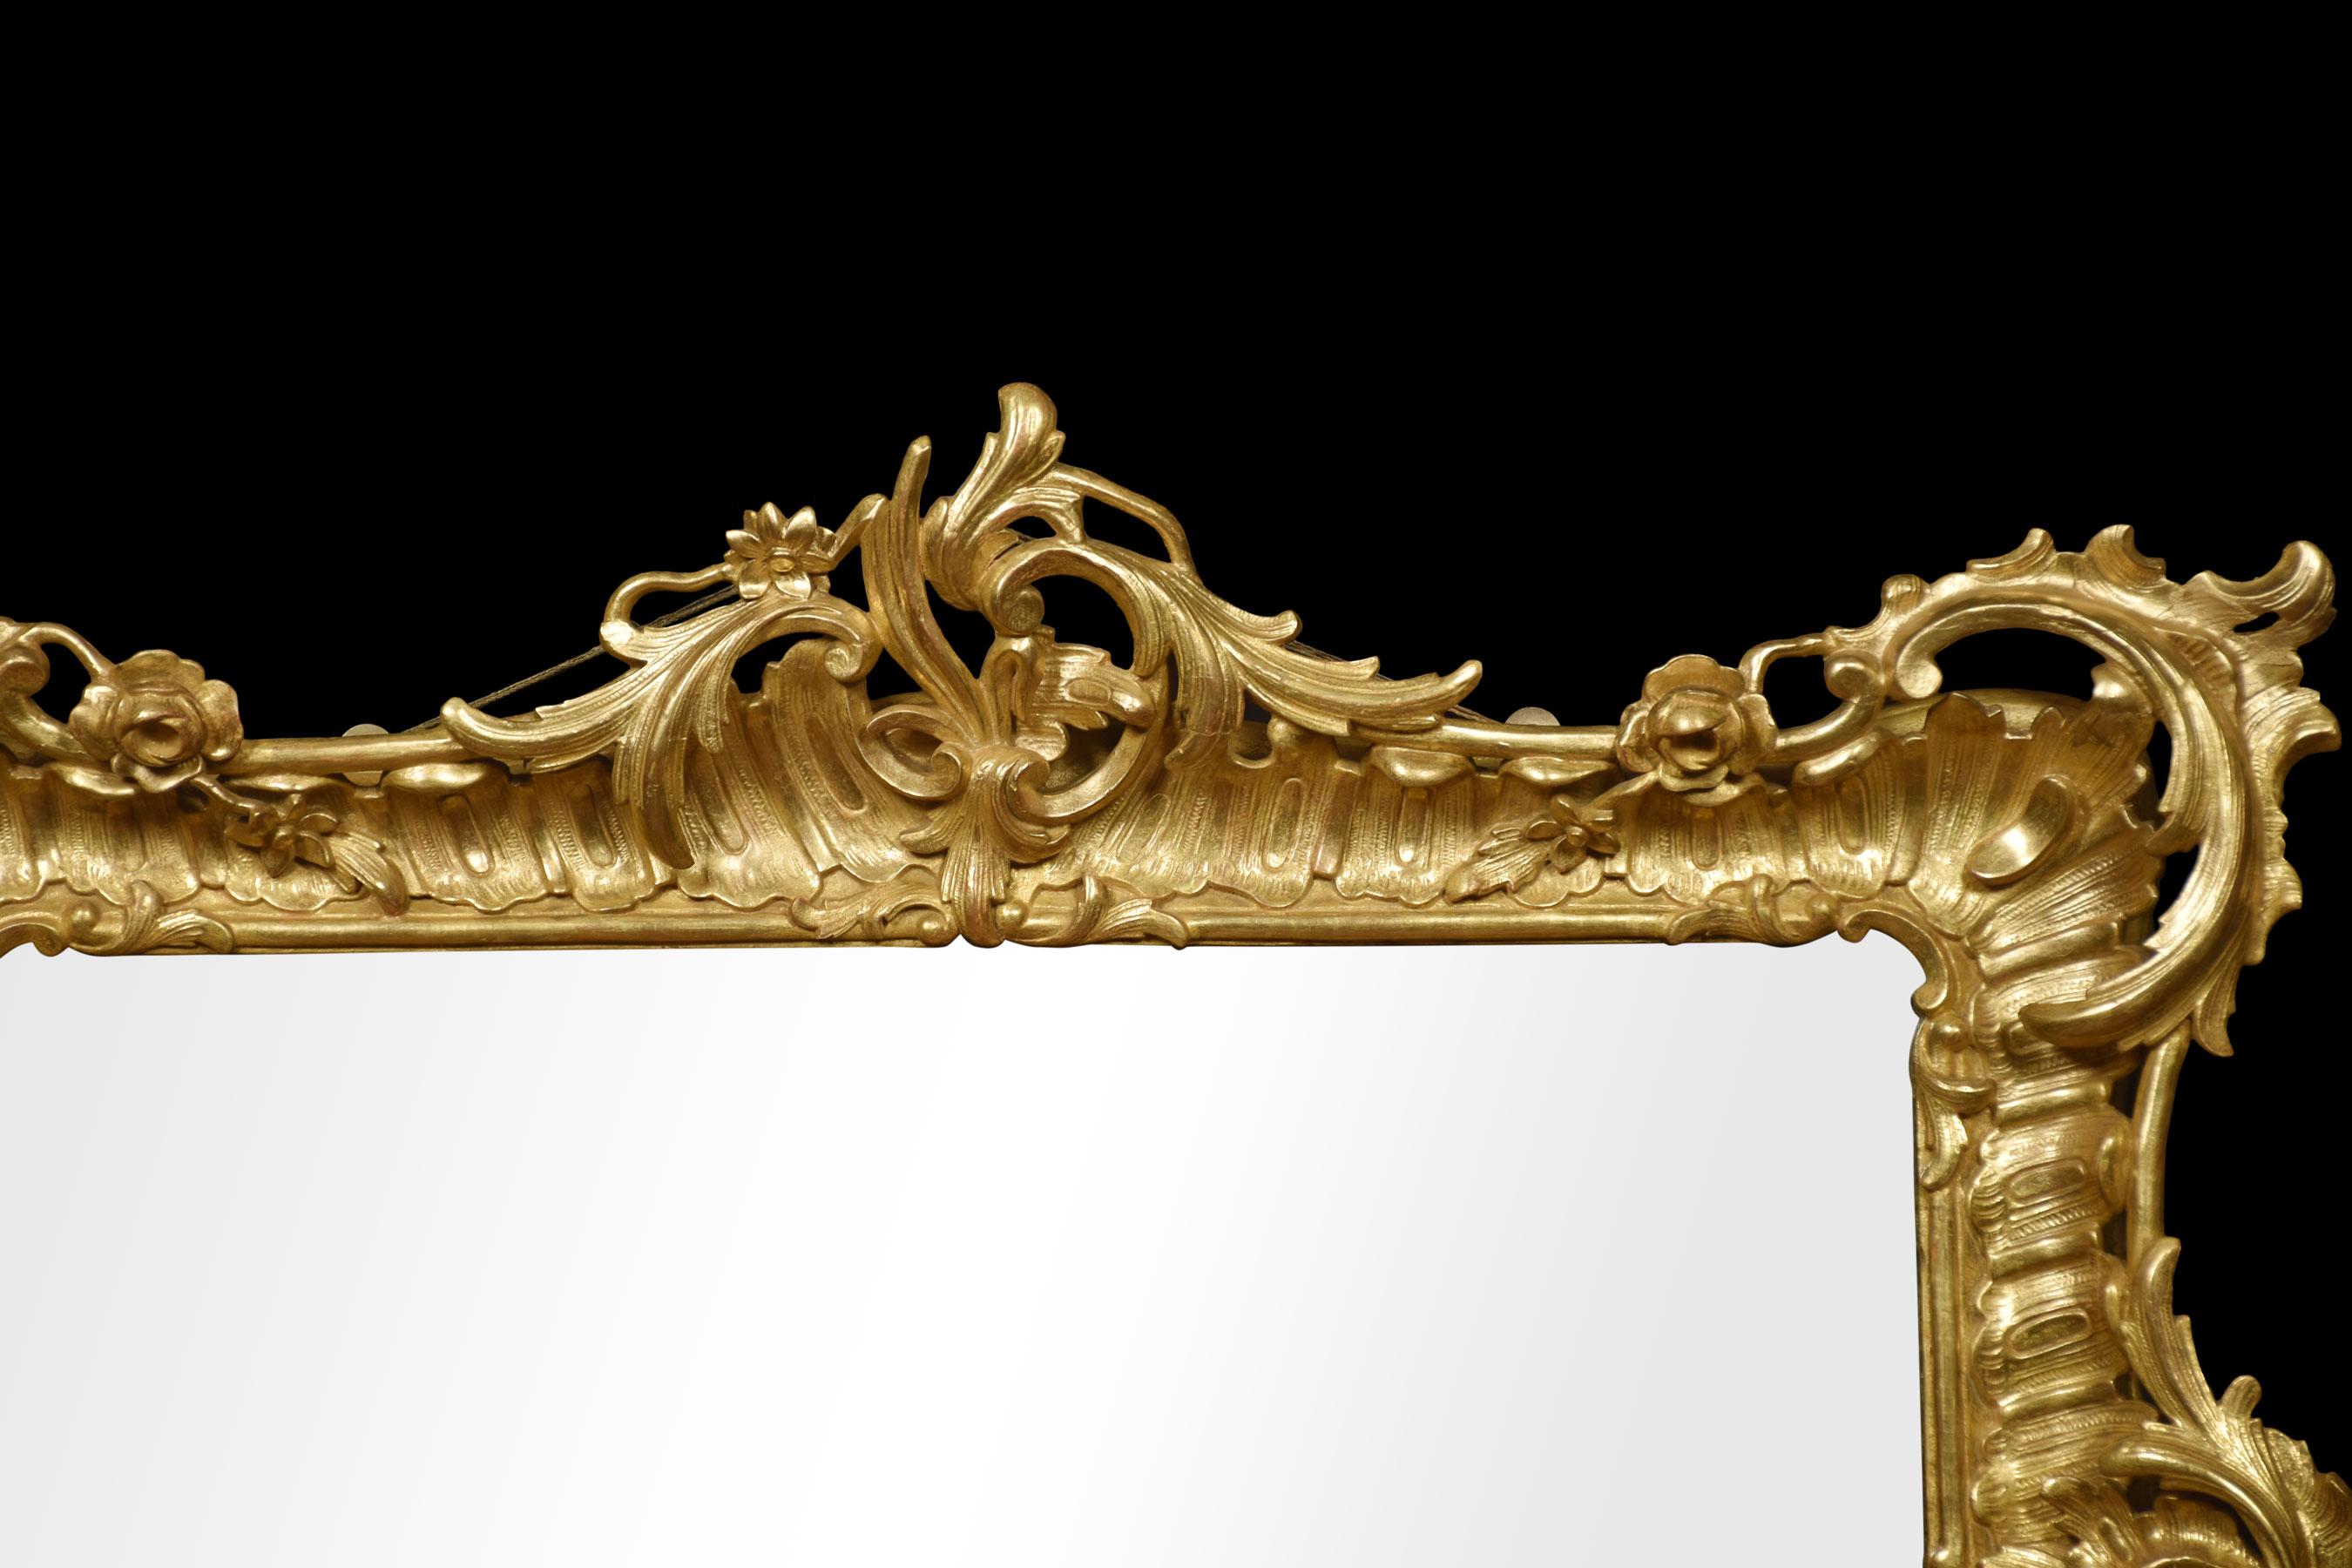 Large 19th-century gilt-wood wall mirror in the rococo manner the scrolling foliated frame surrounding the original mirror plate.
Dimensions
Height 39.5 inches
Width 46.5 inches
Depth 5 inches.